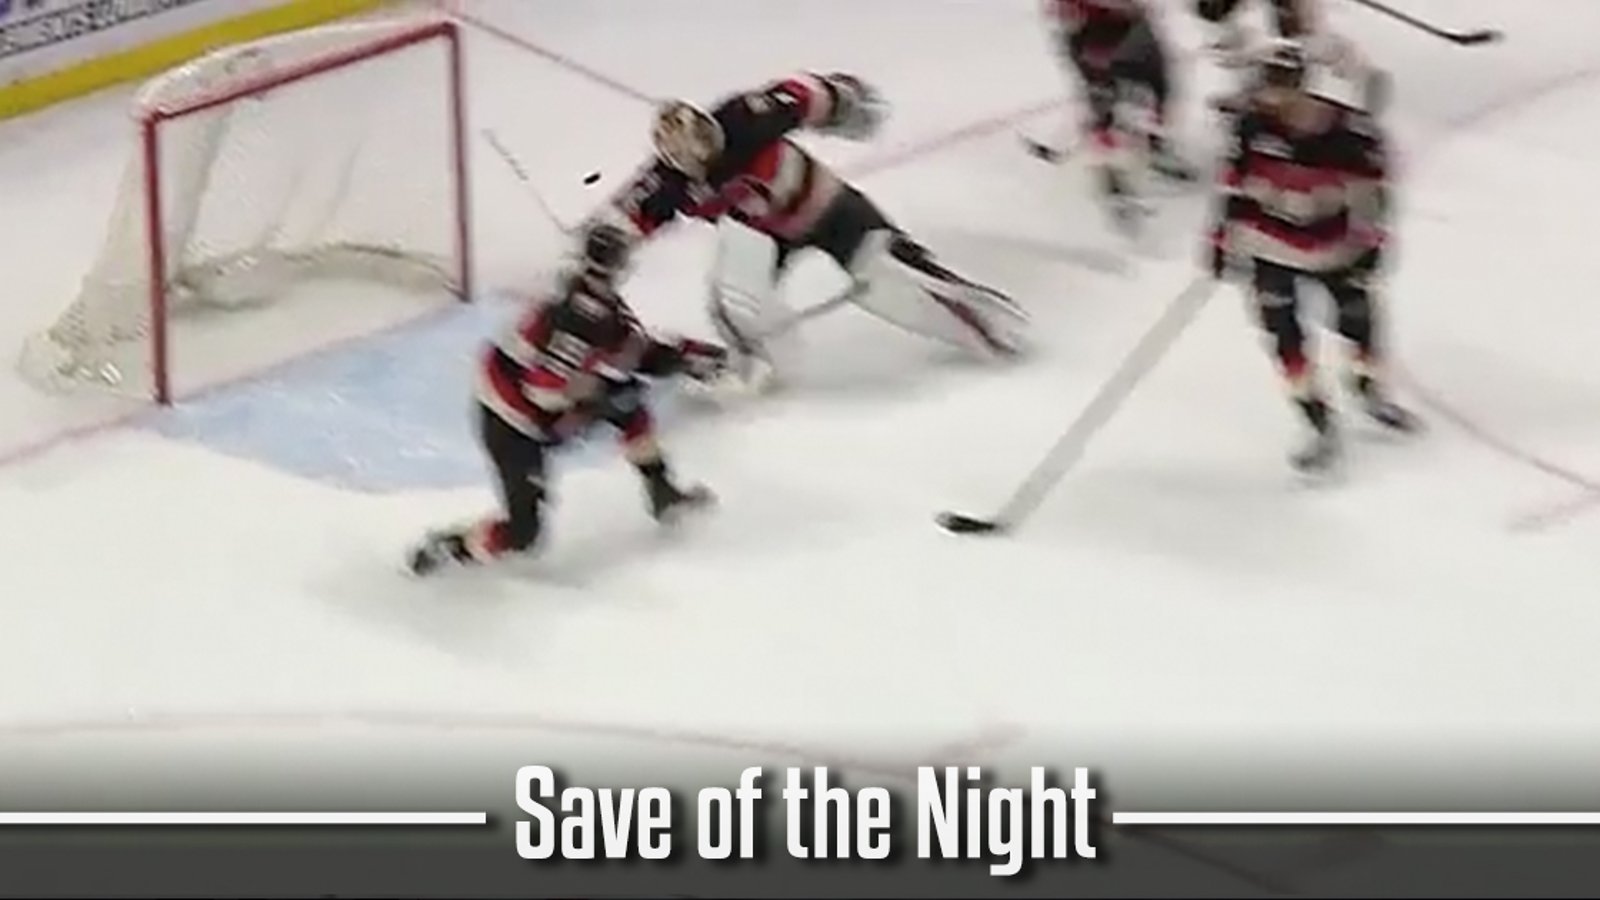 MUST SEE: Save of the Night - Mike Condon uses his stick to knock the shot away!